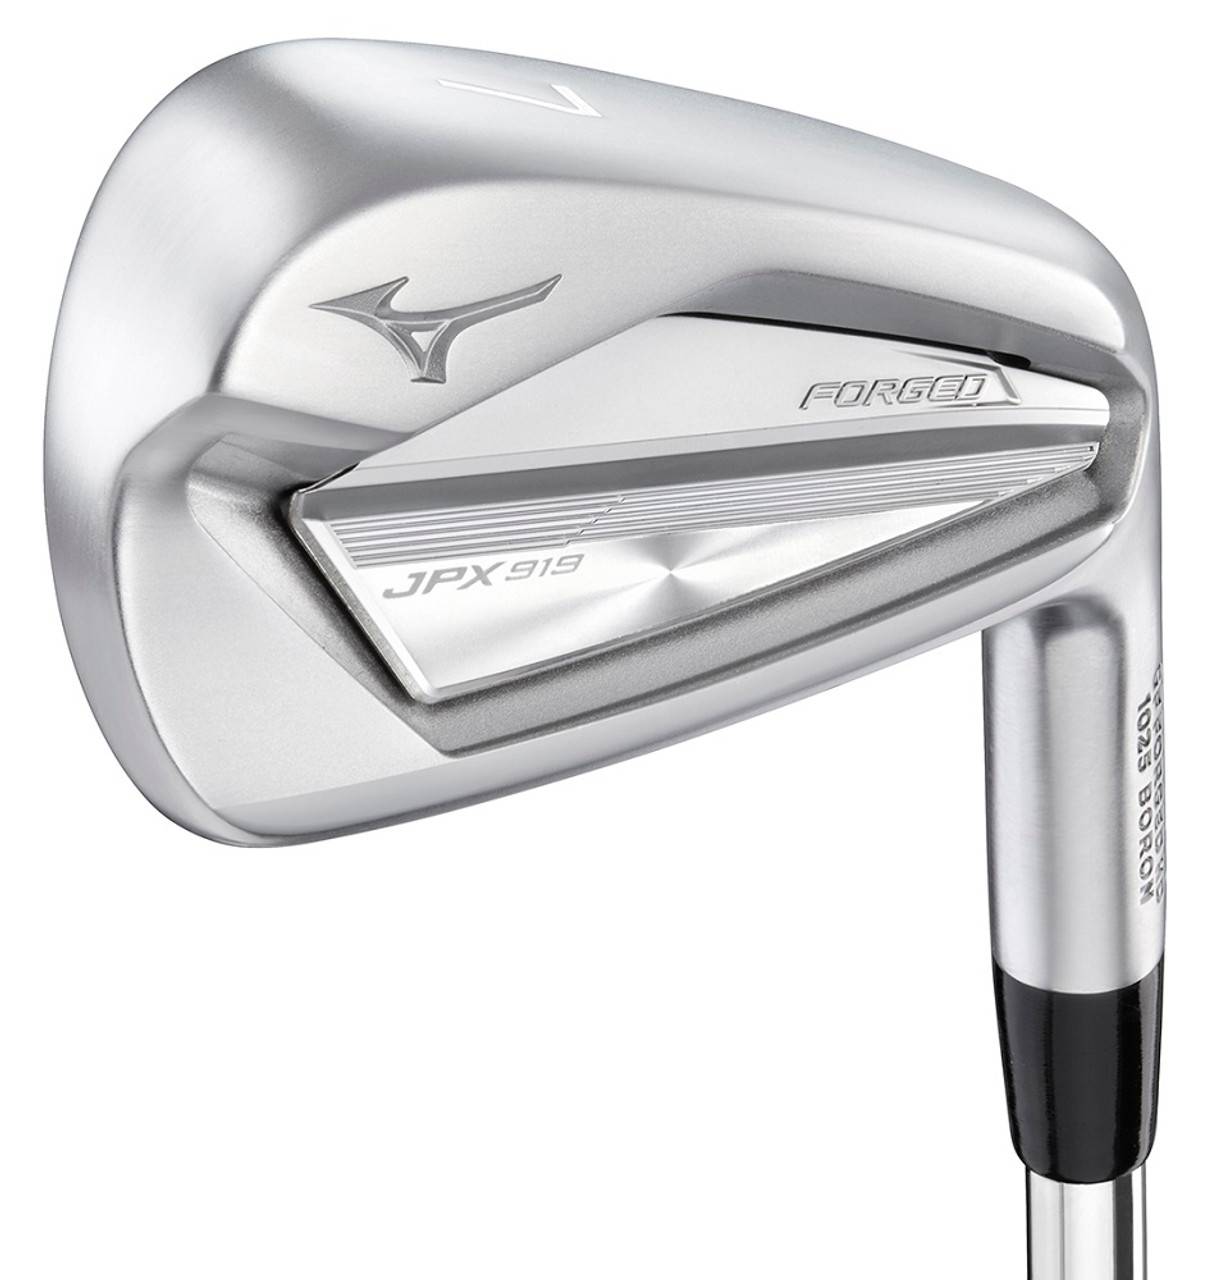 Pre-Owned Mizuno Golf JPX 919 Forged Irons (8 Iron Set)